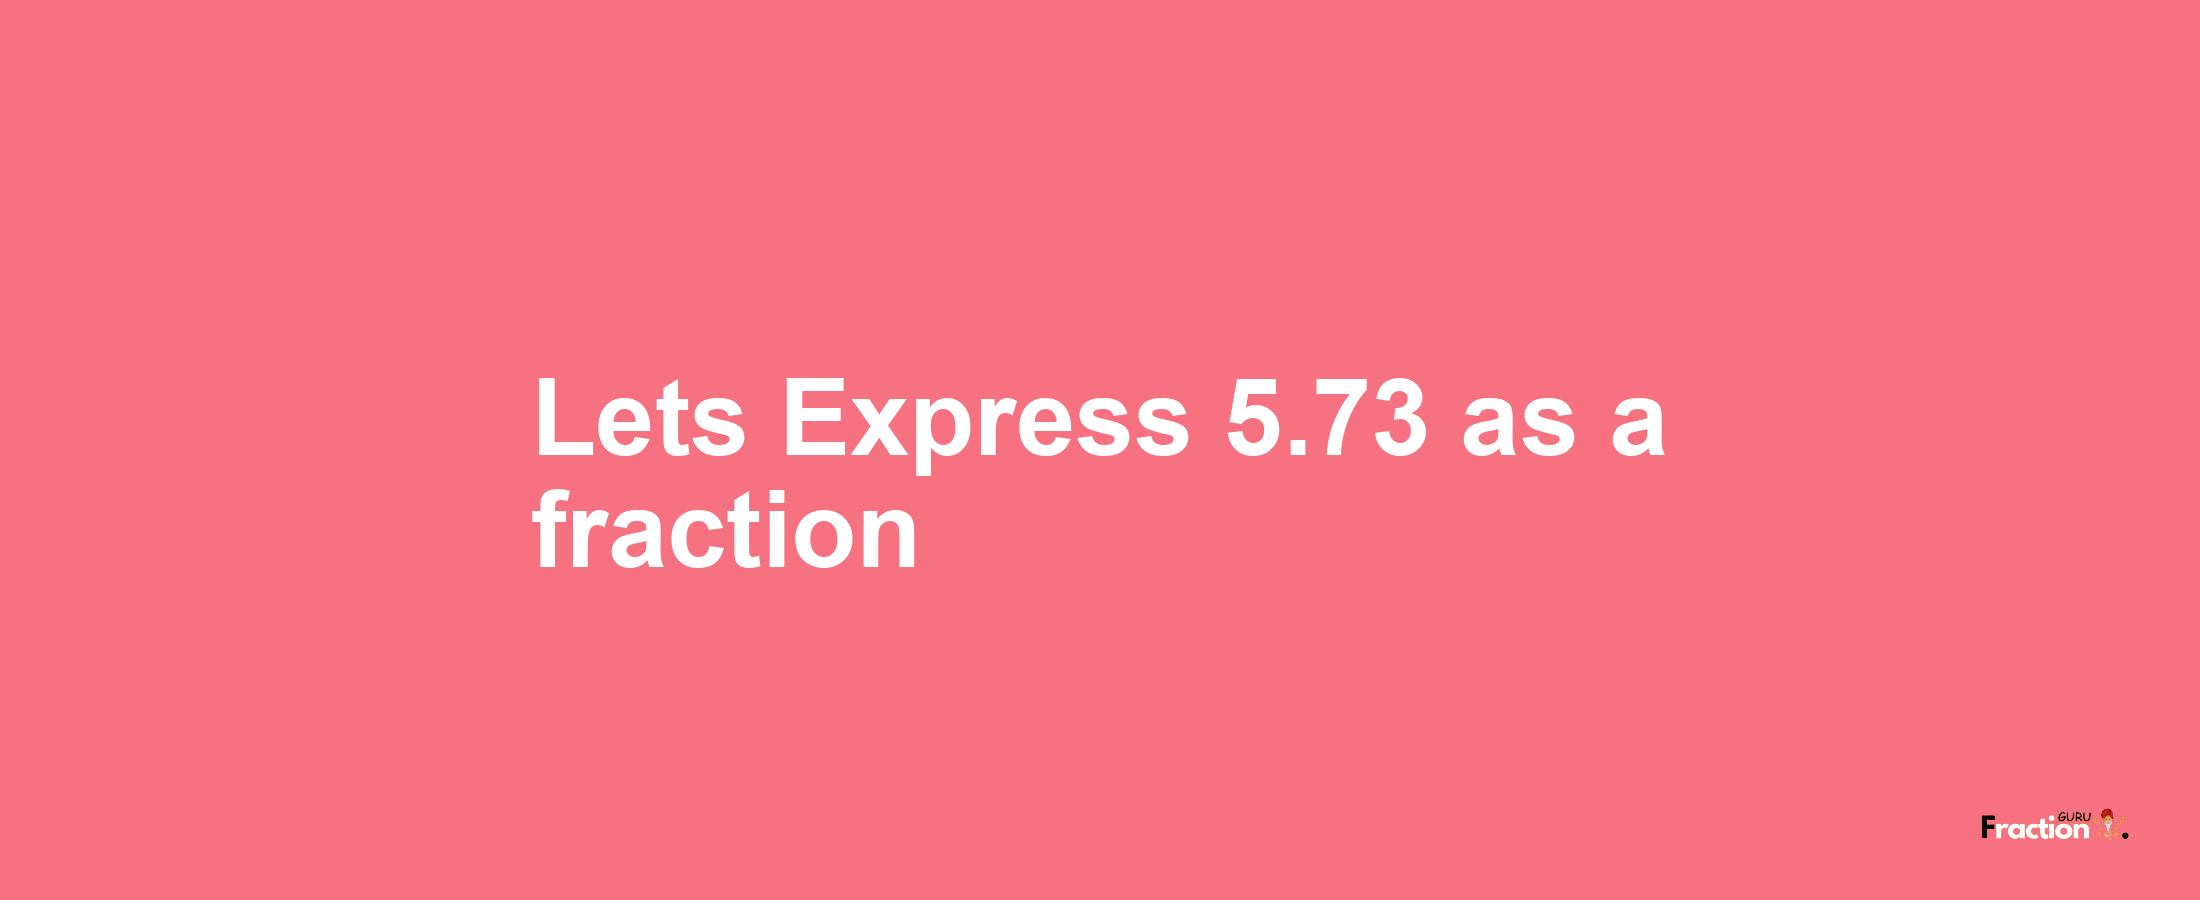 Lets Express 5.73 as afraction